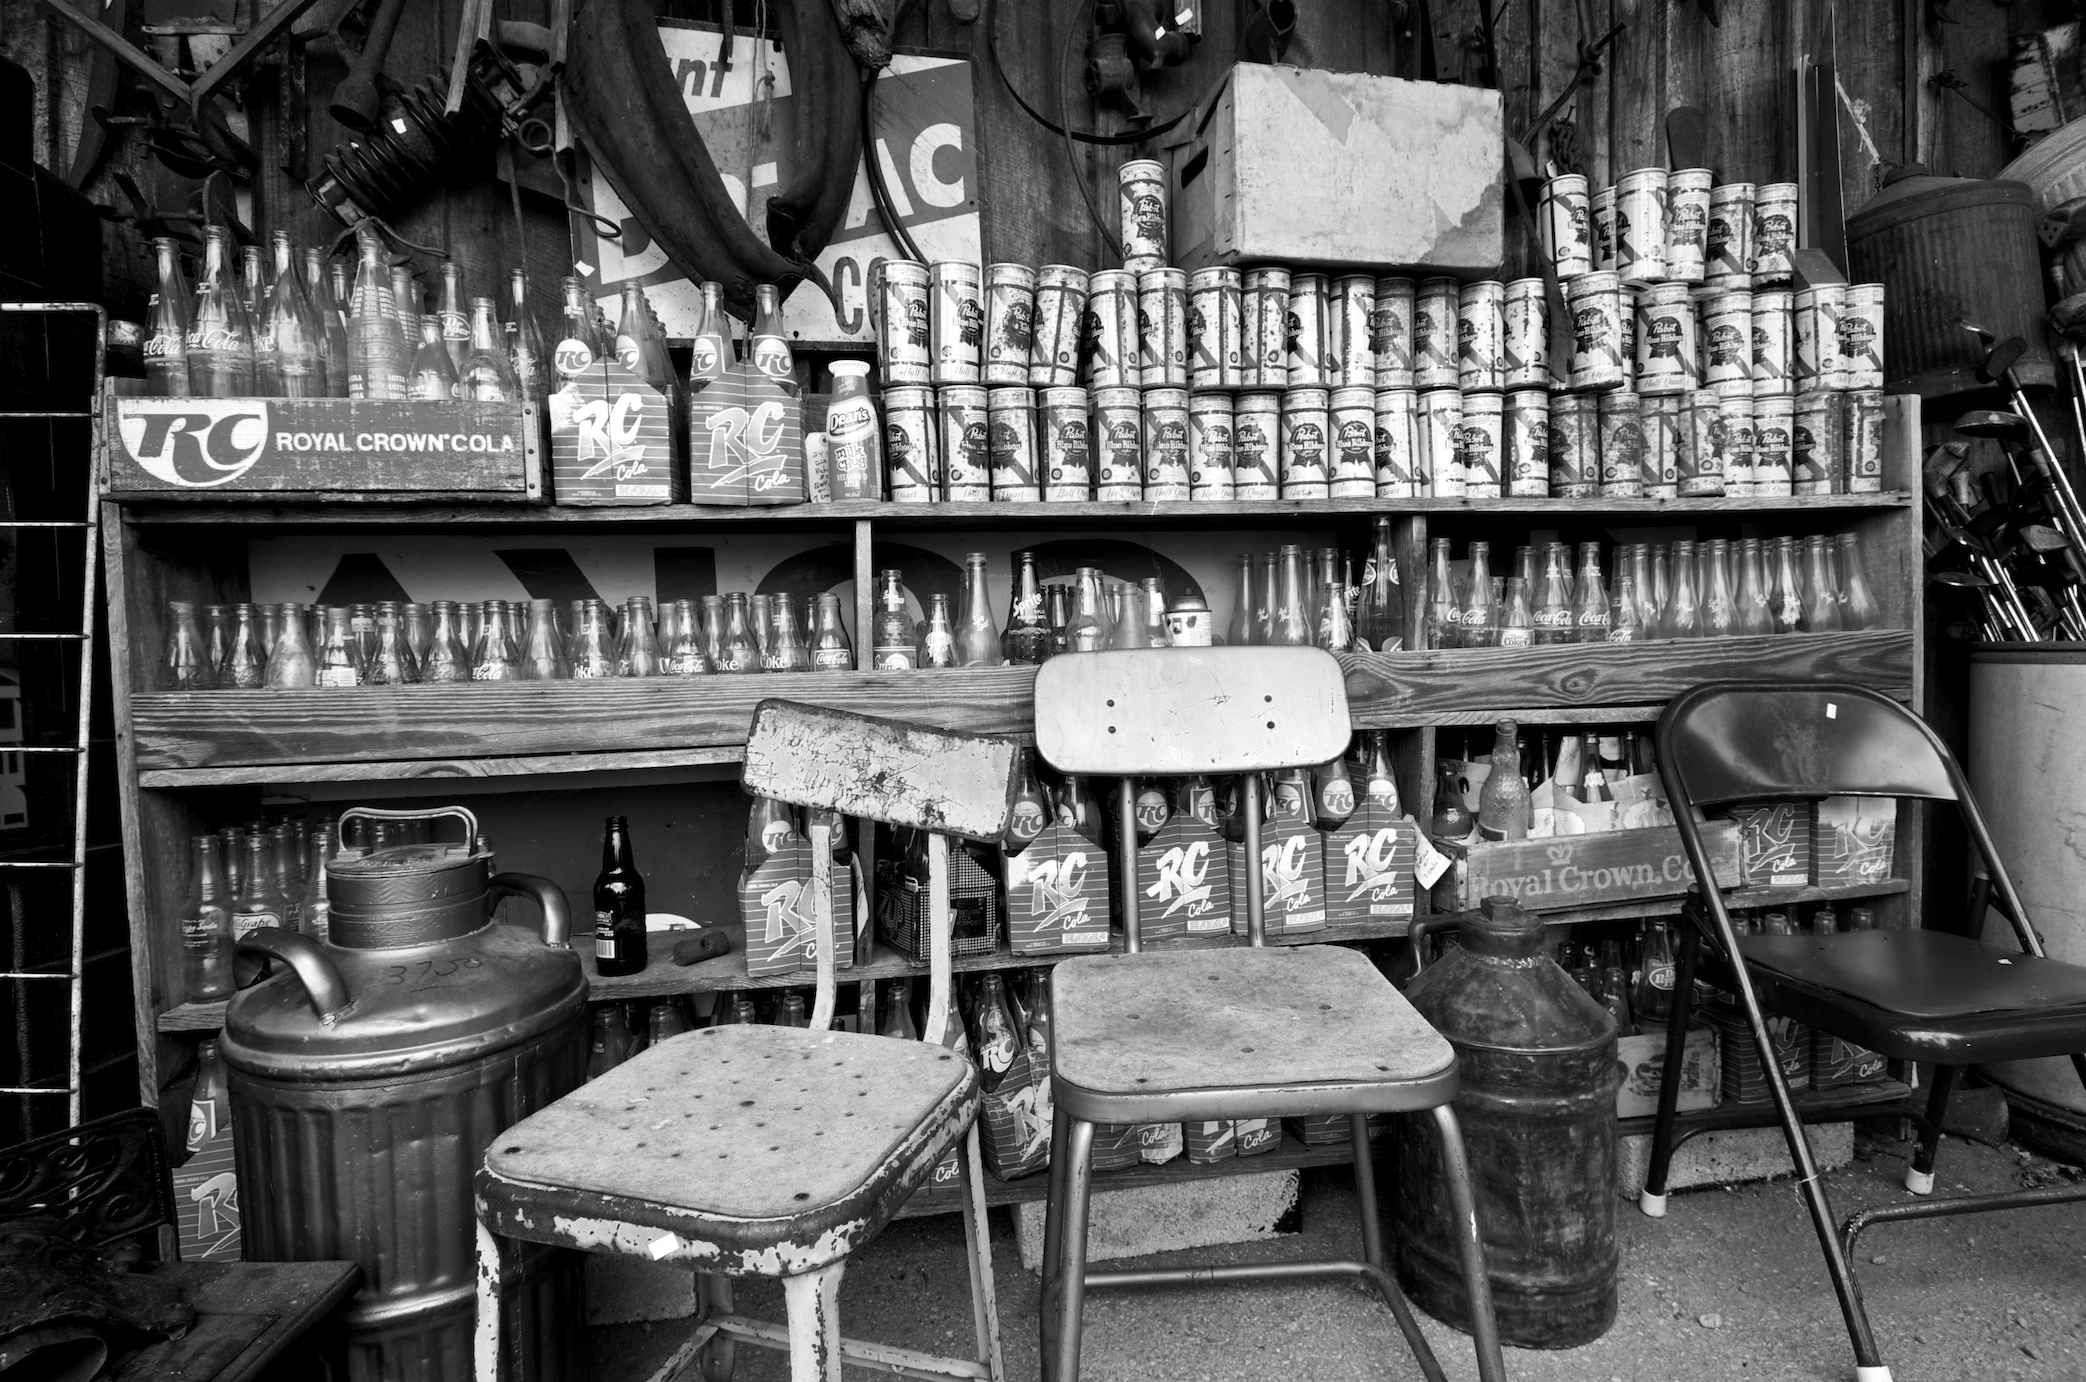 old furniture and soda cans on display in store